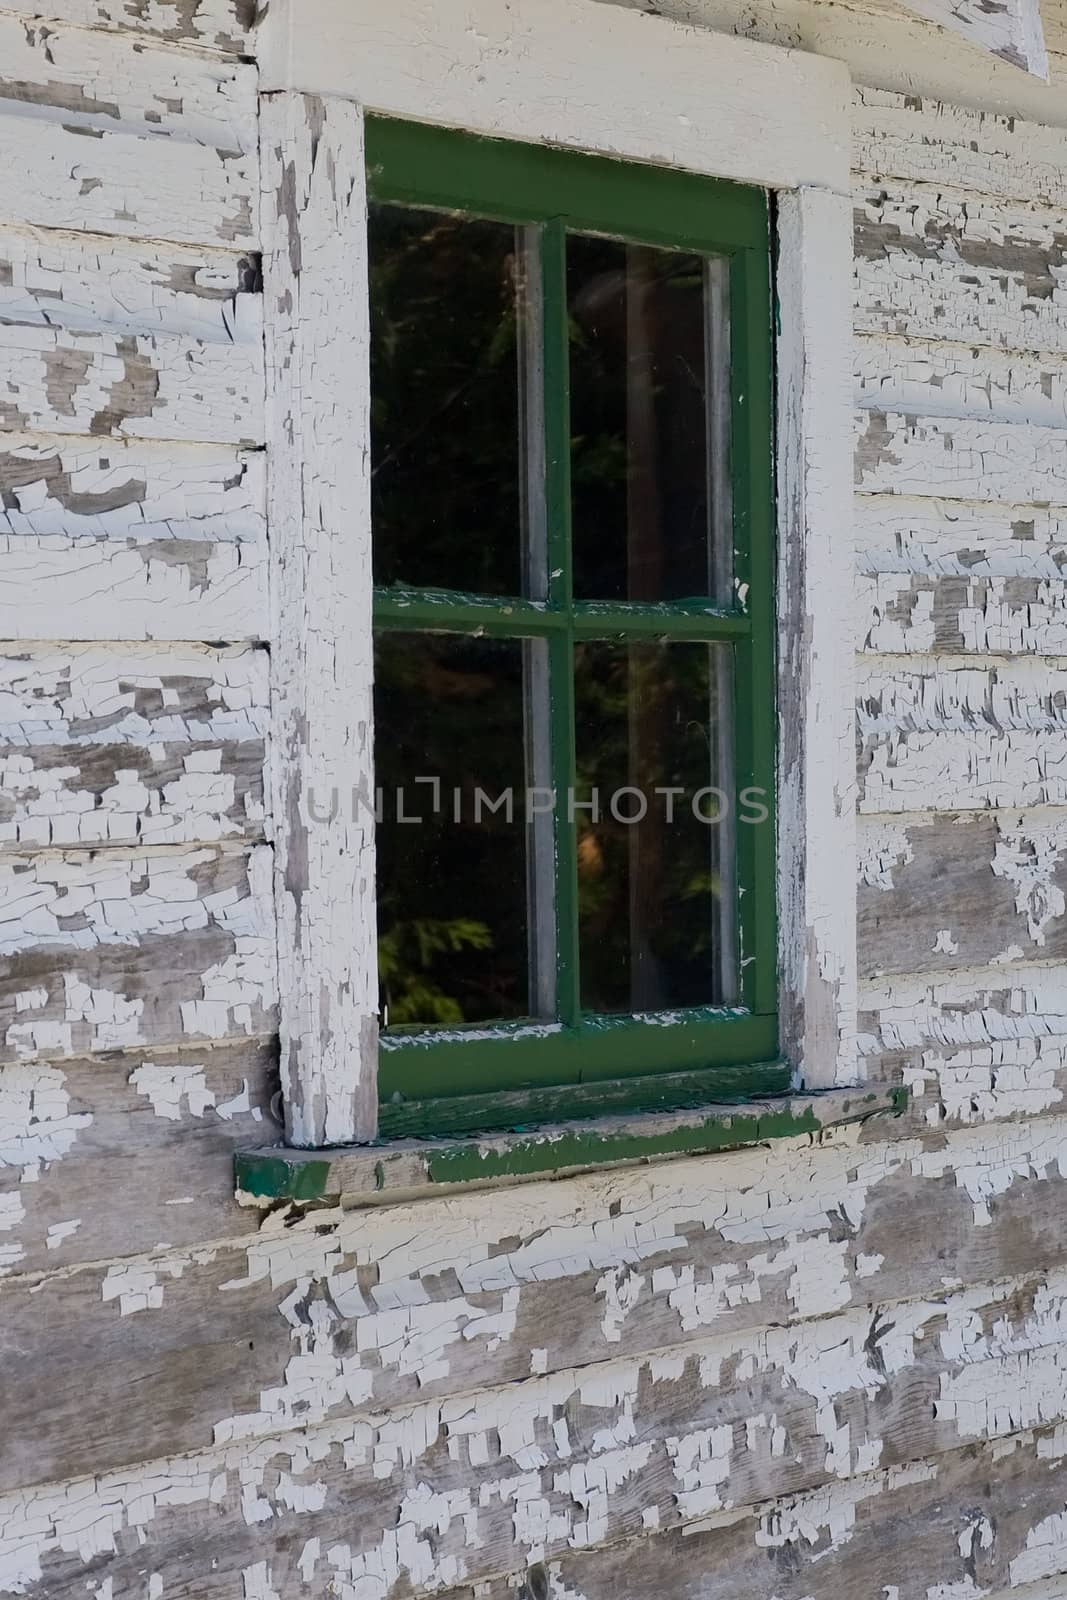 A green window surrounded by a weathered white